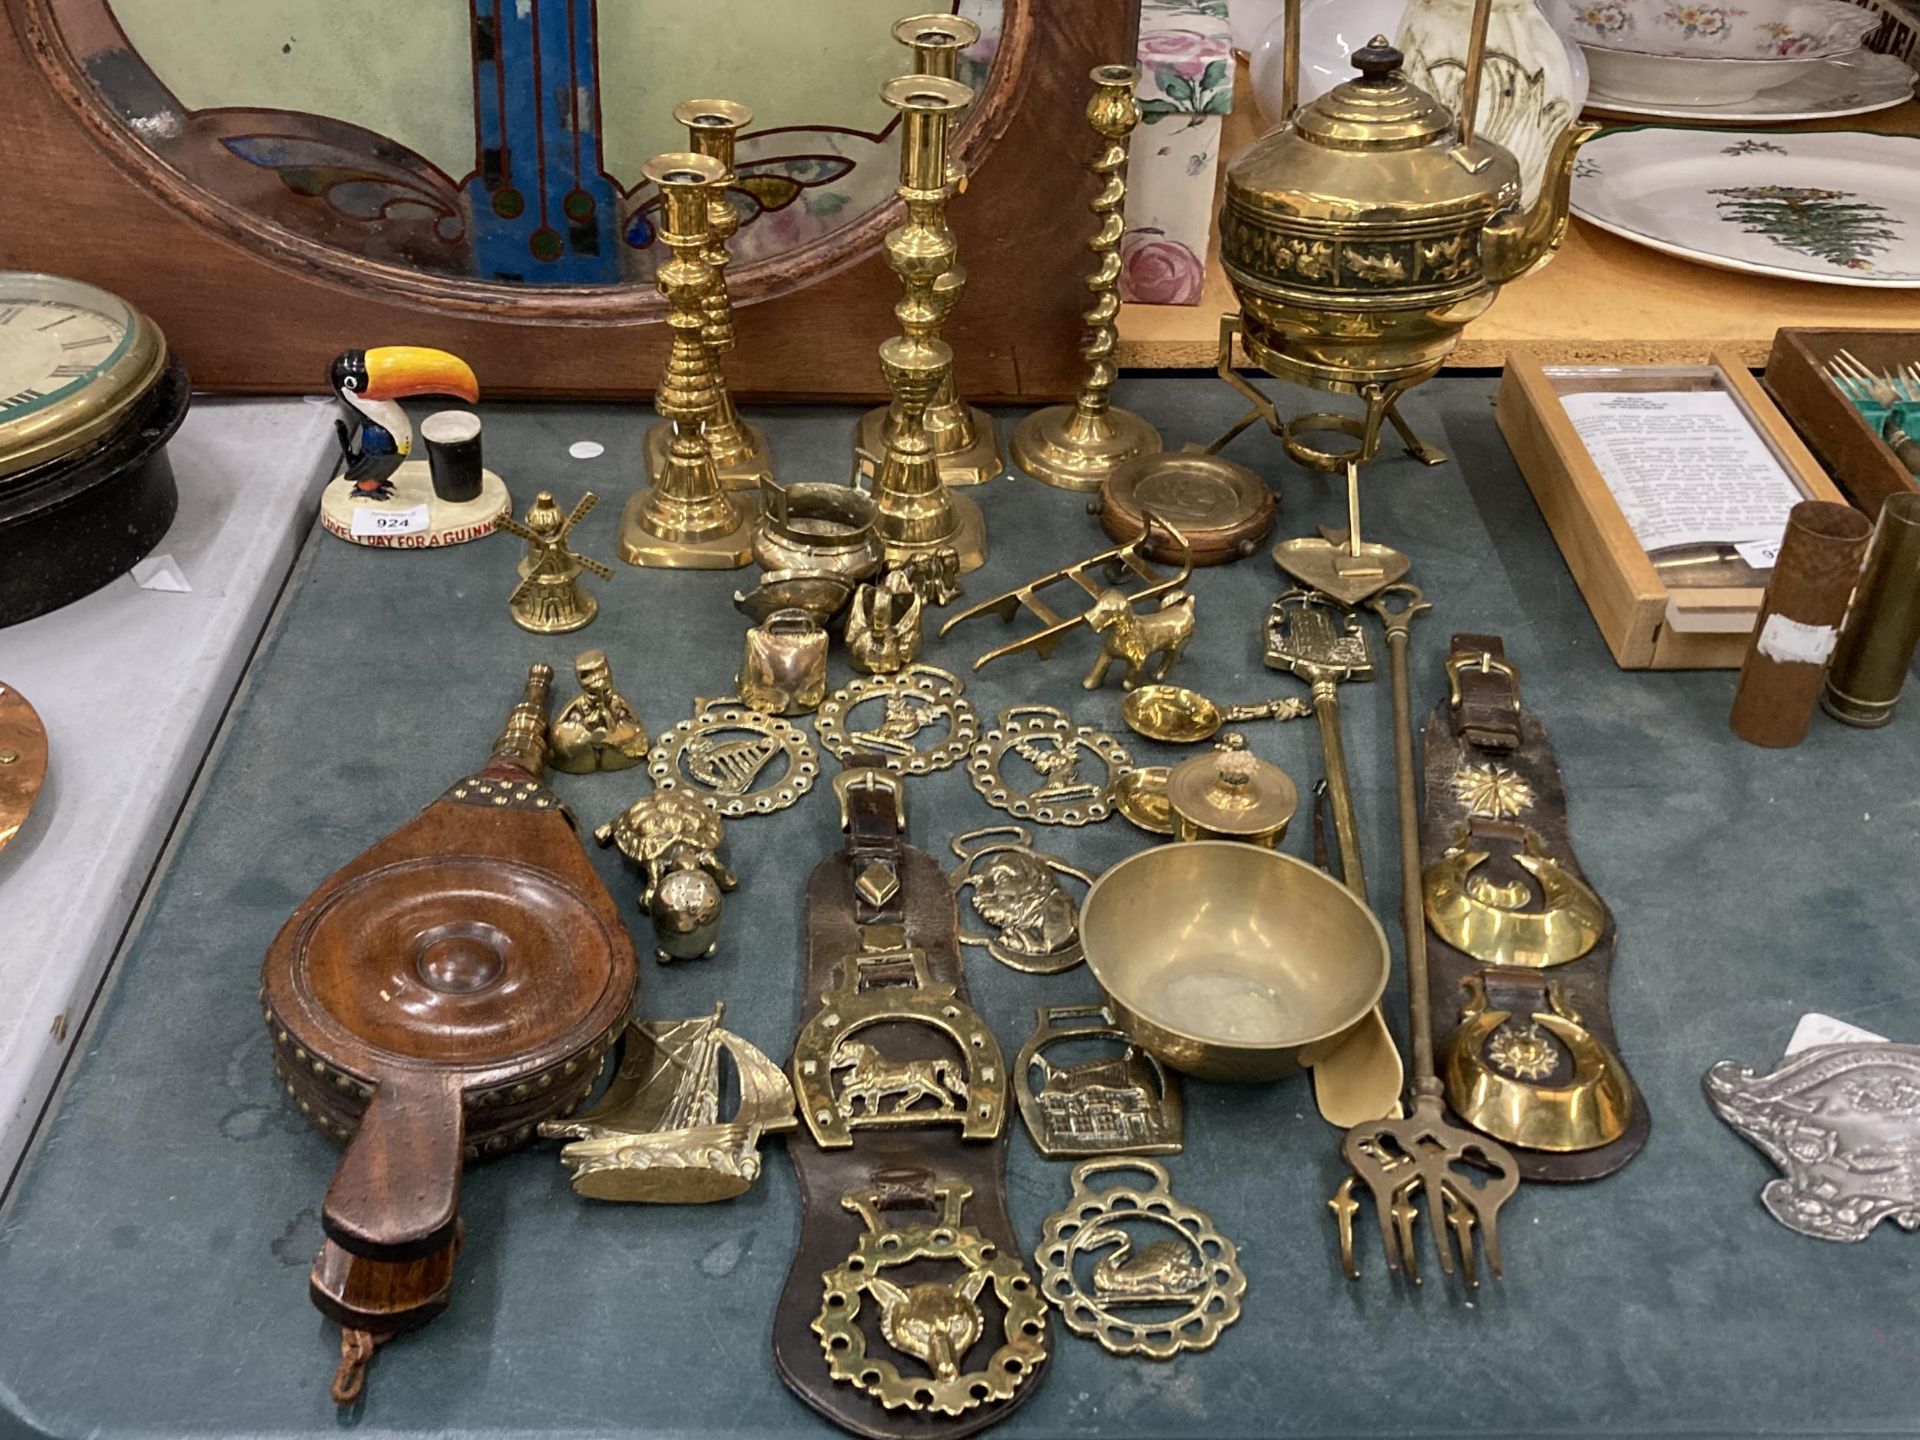 A LARGE MIXED GROUP OF BRASS AND FURTHER ITEMS - SPIRIT KETTLE ON STAND, HORSE BRASS, WOODEN AND